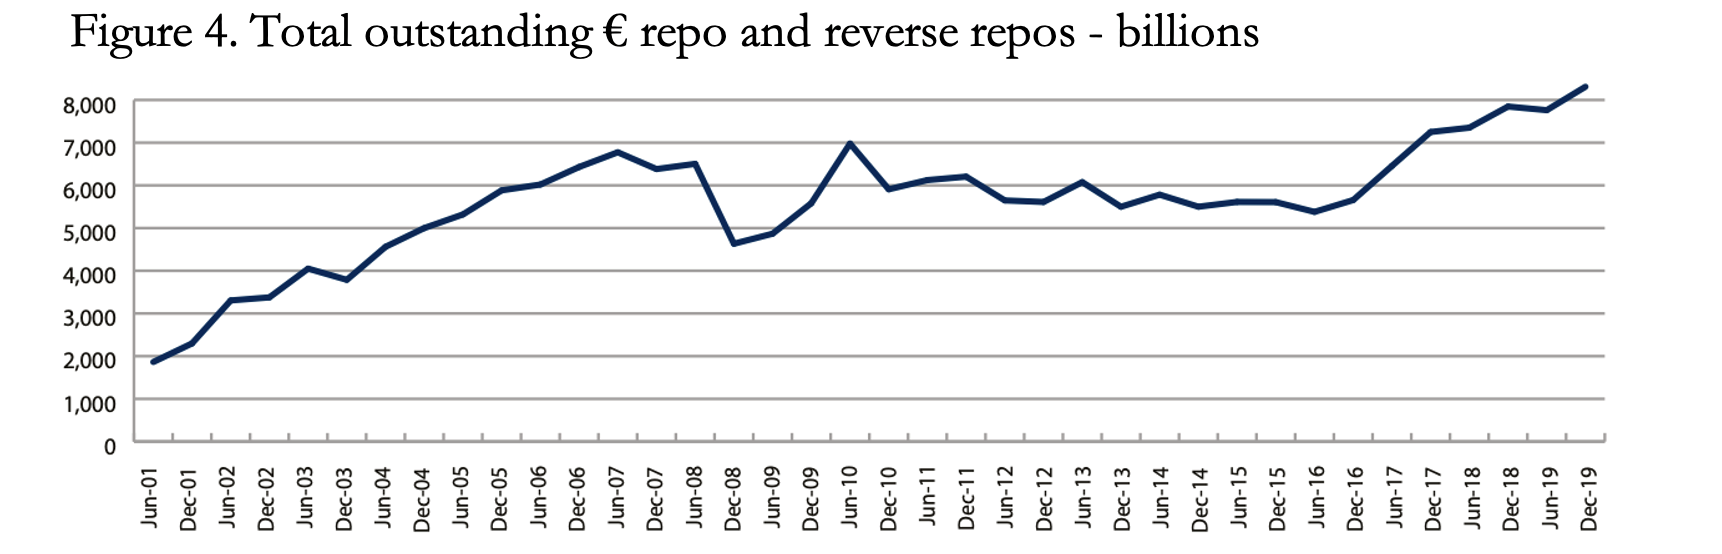 Total Outstanding Repos And Reverse Repos